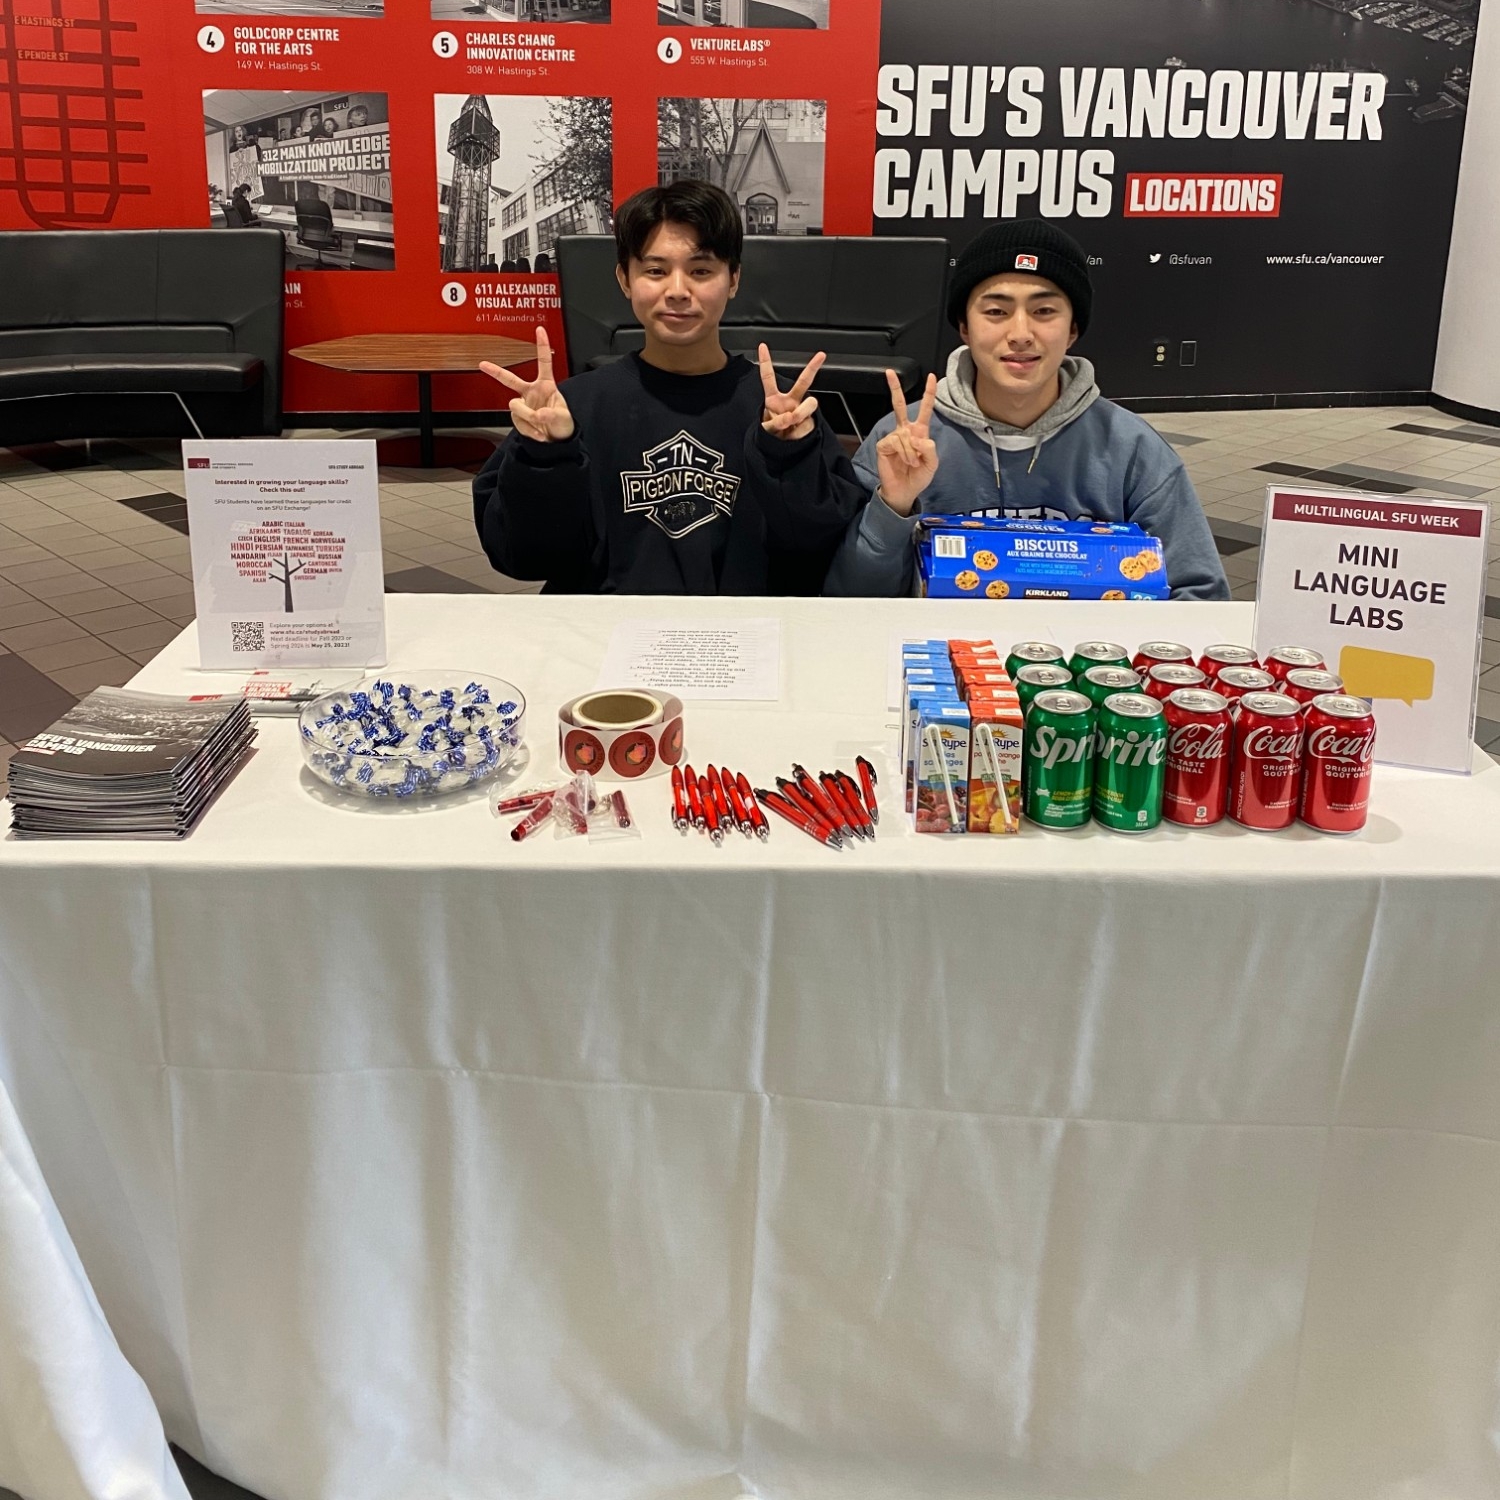 Two students sitting at a table and giving away snacks and prizes as part of a mini language labs activity for Multilingual Week 2023 at Vancouver campus